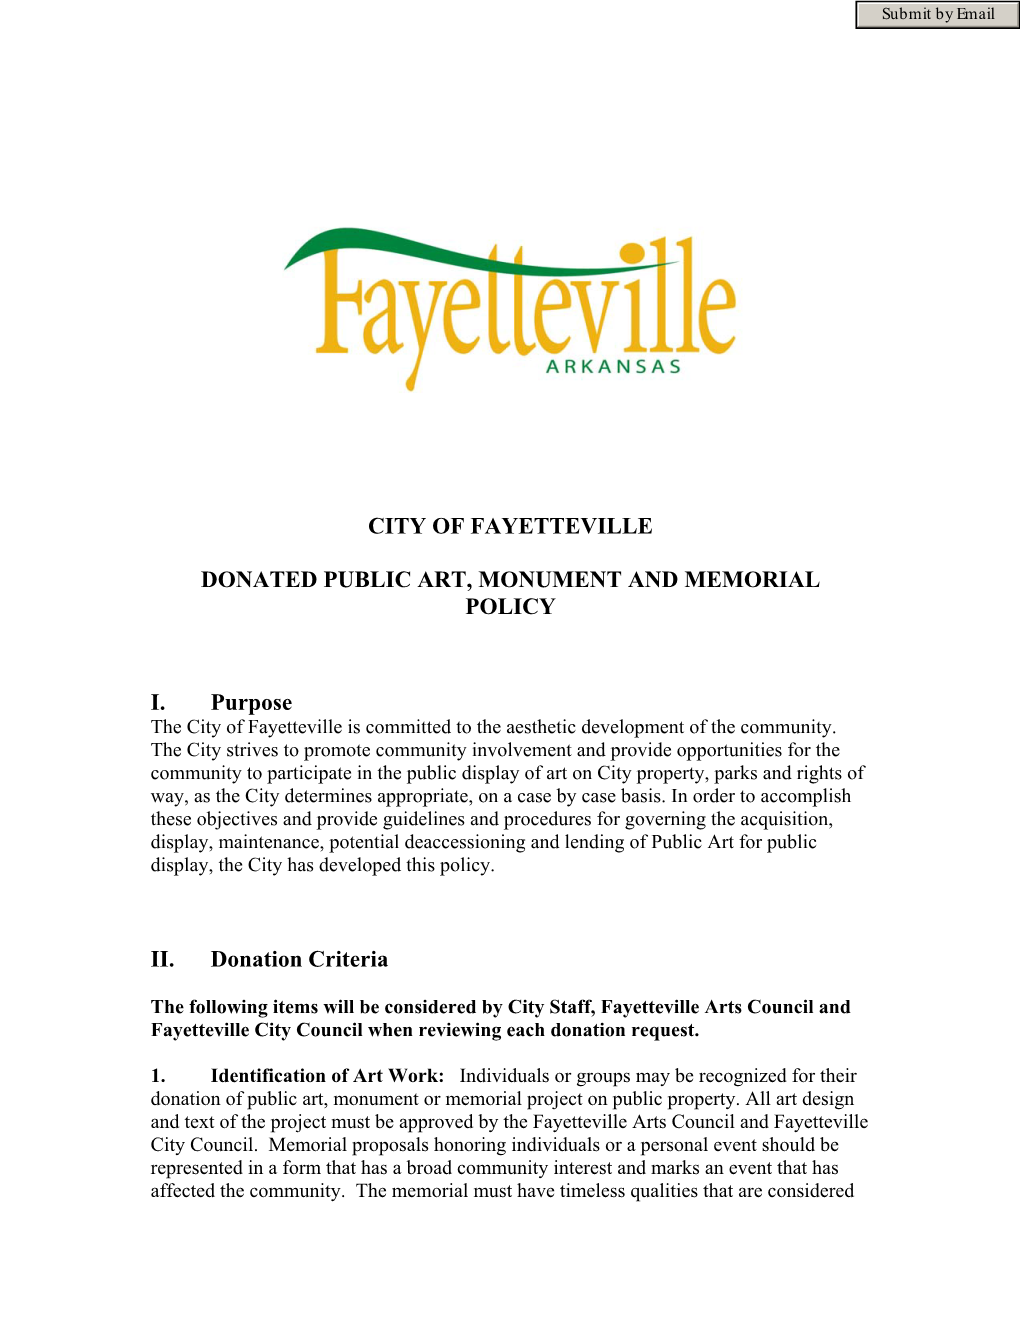 City of Fayetteville Donated Public Art, Monument And